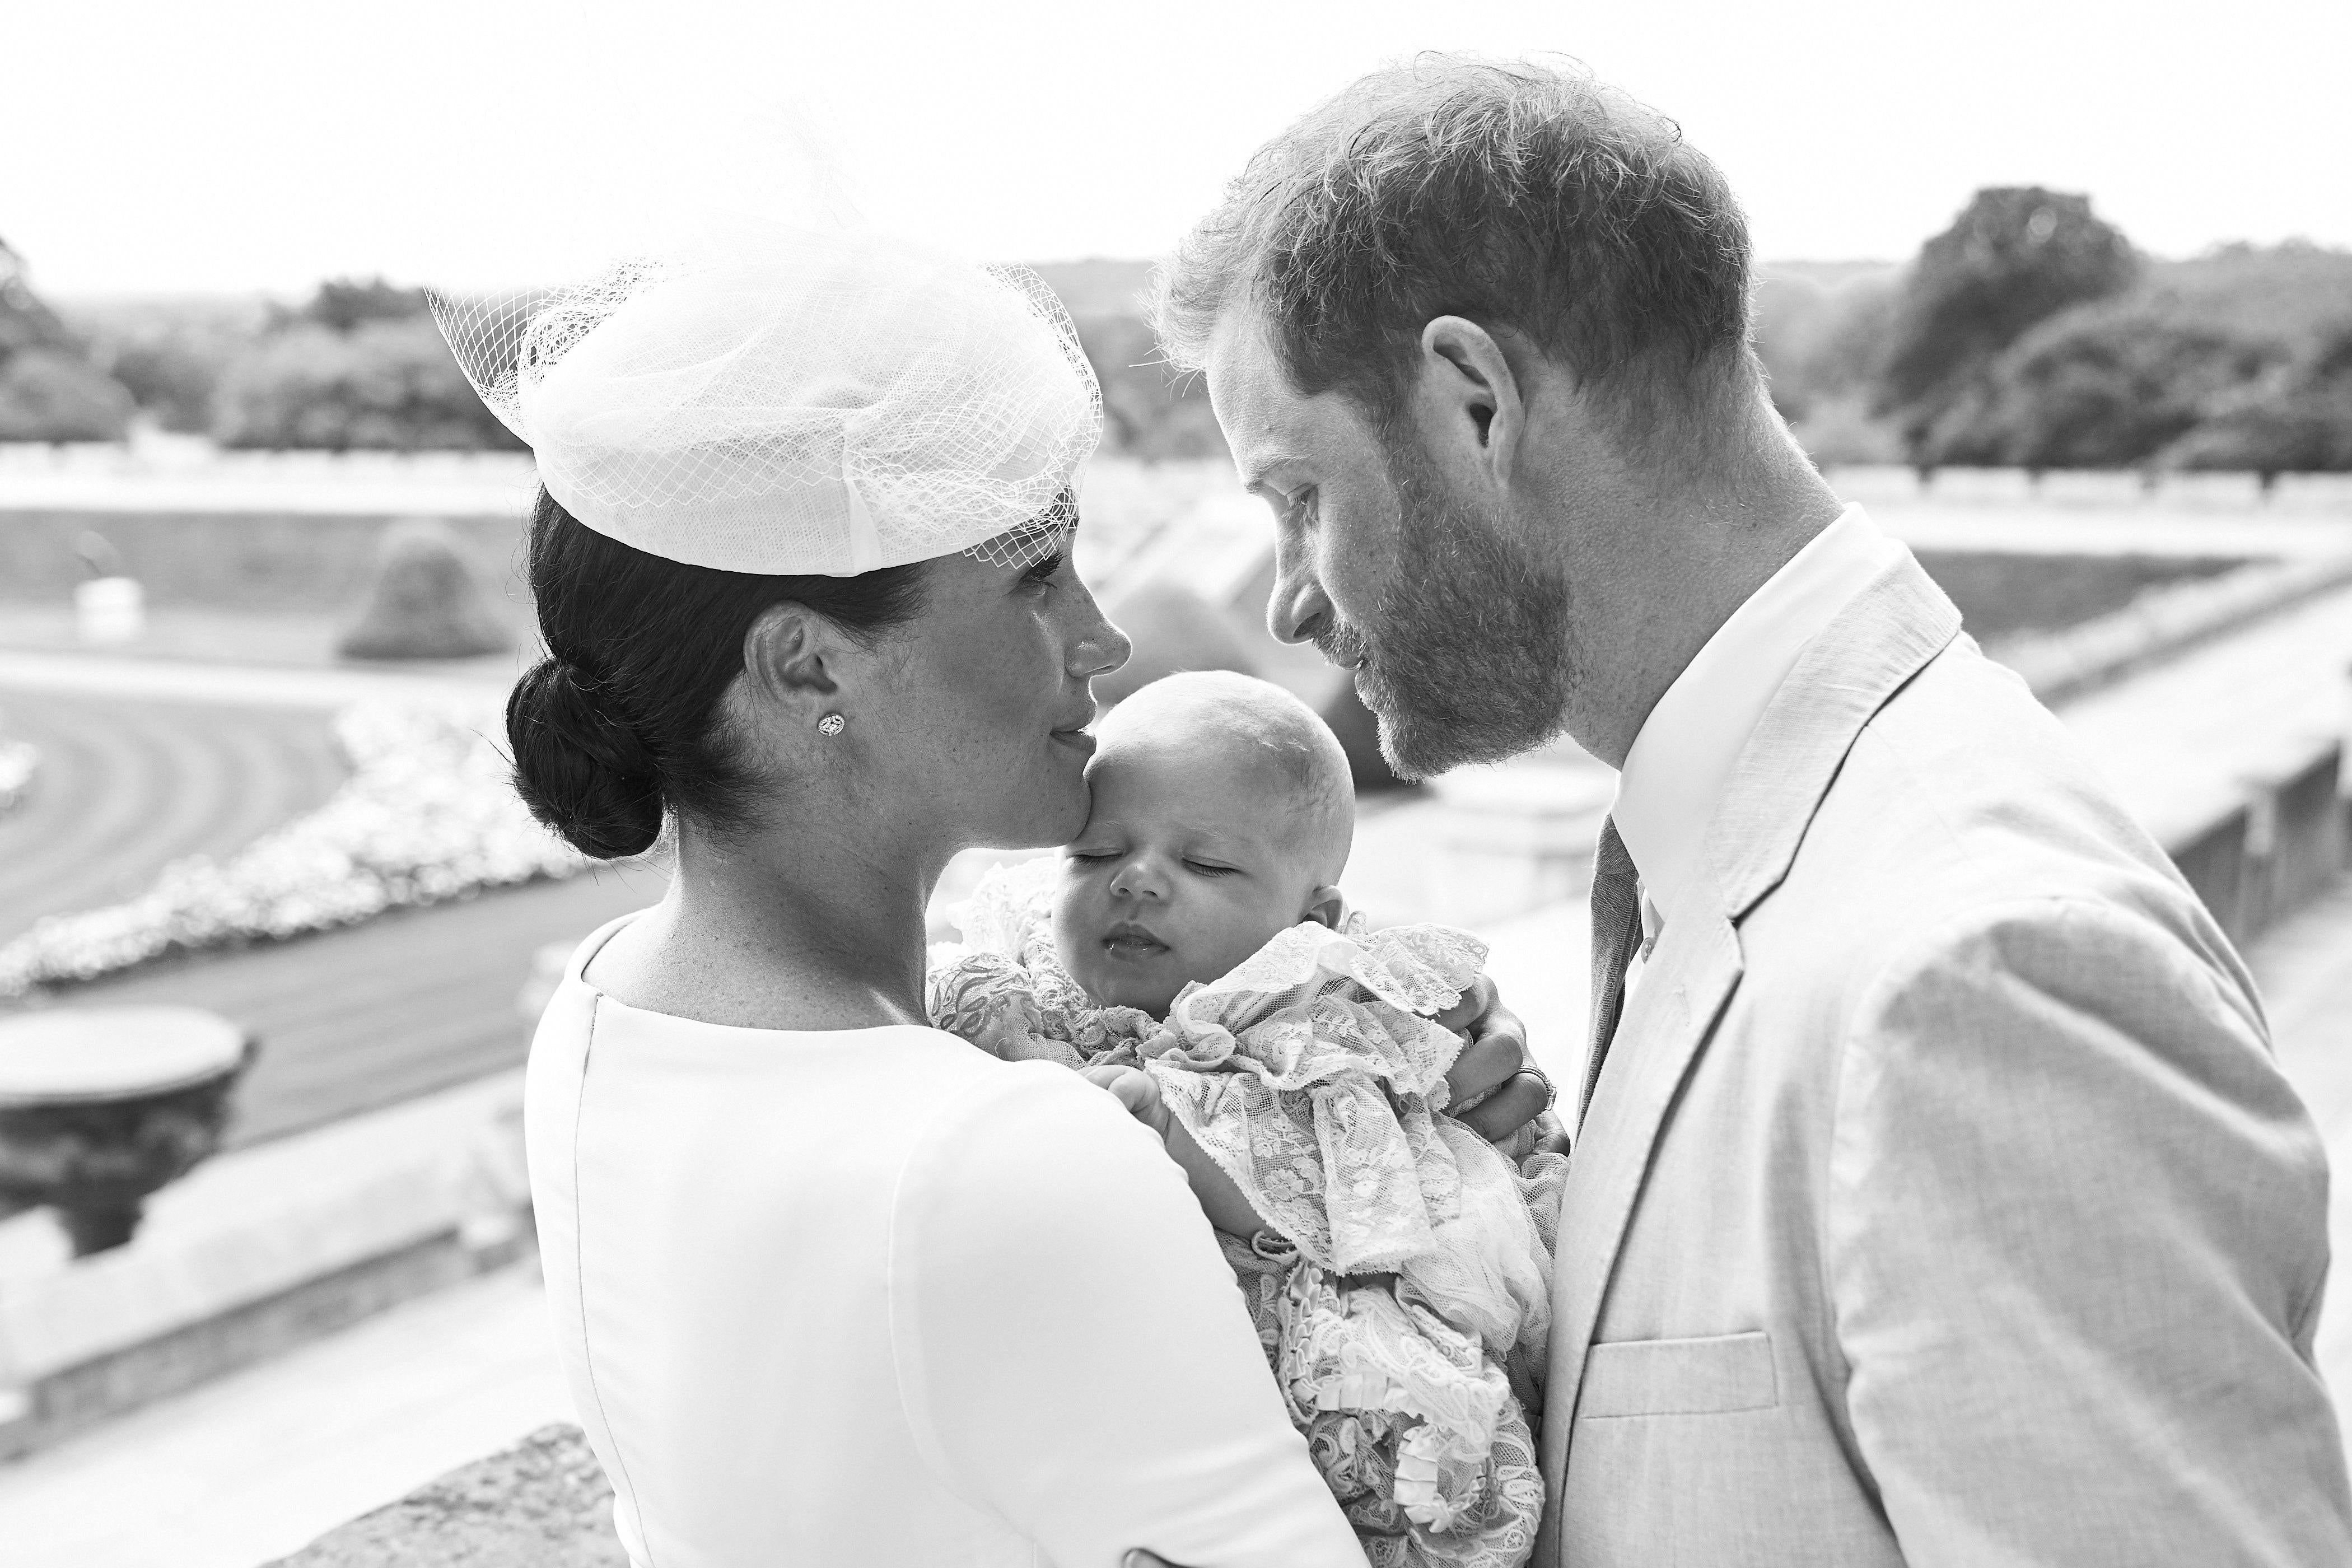 The Duke and Duchess of Sussex holding their newly-baptized child.